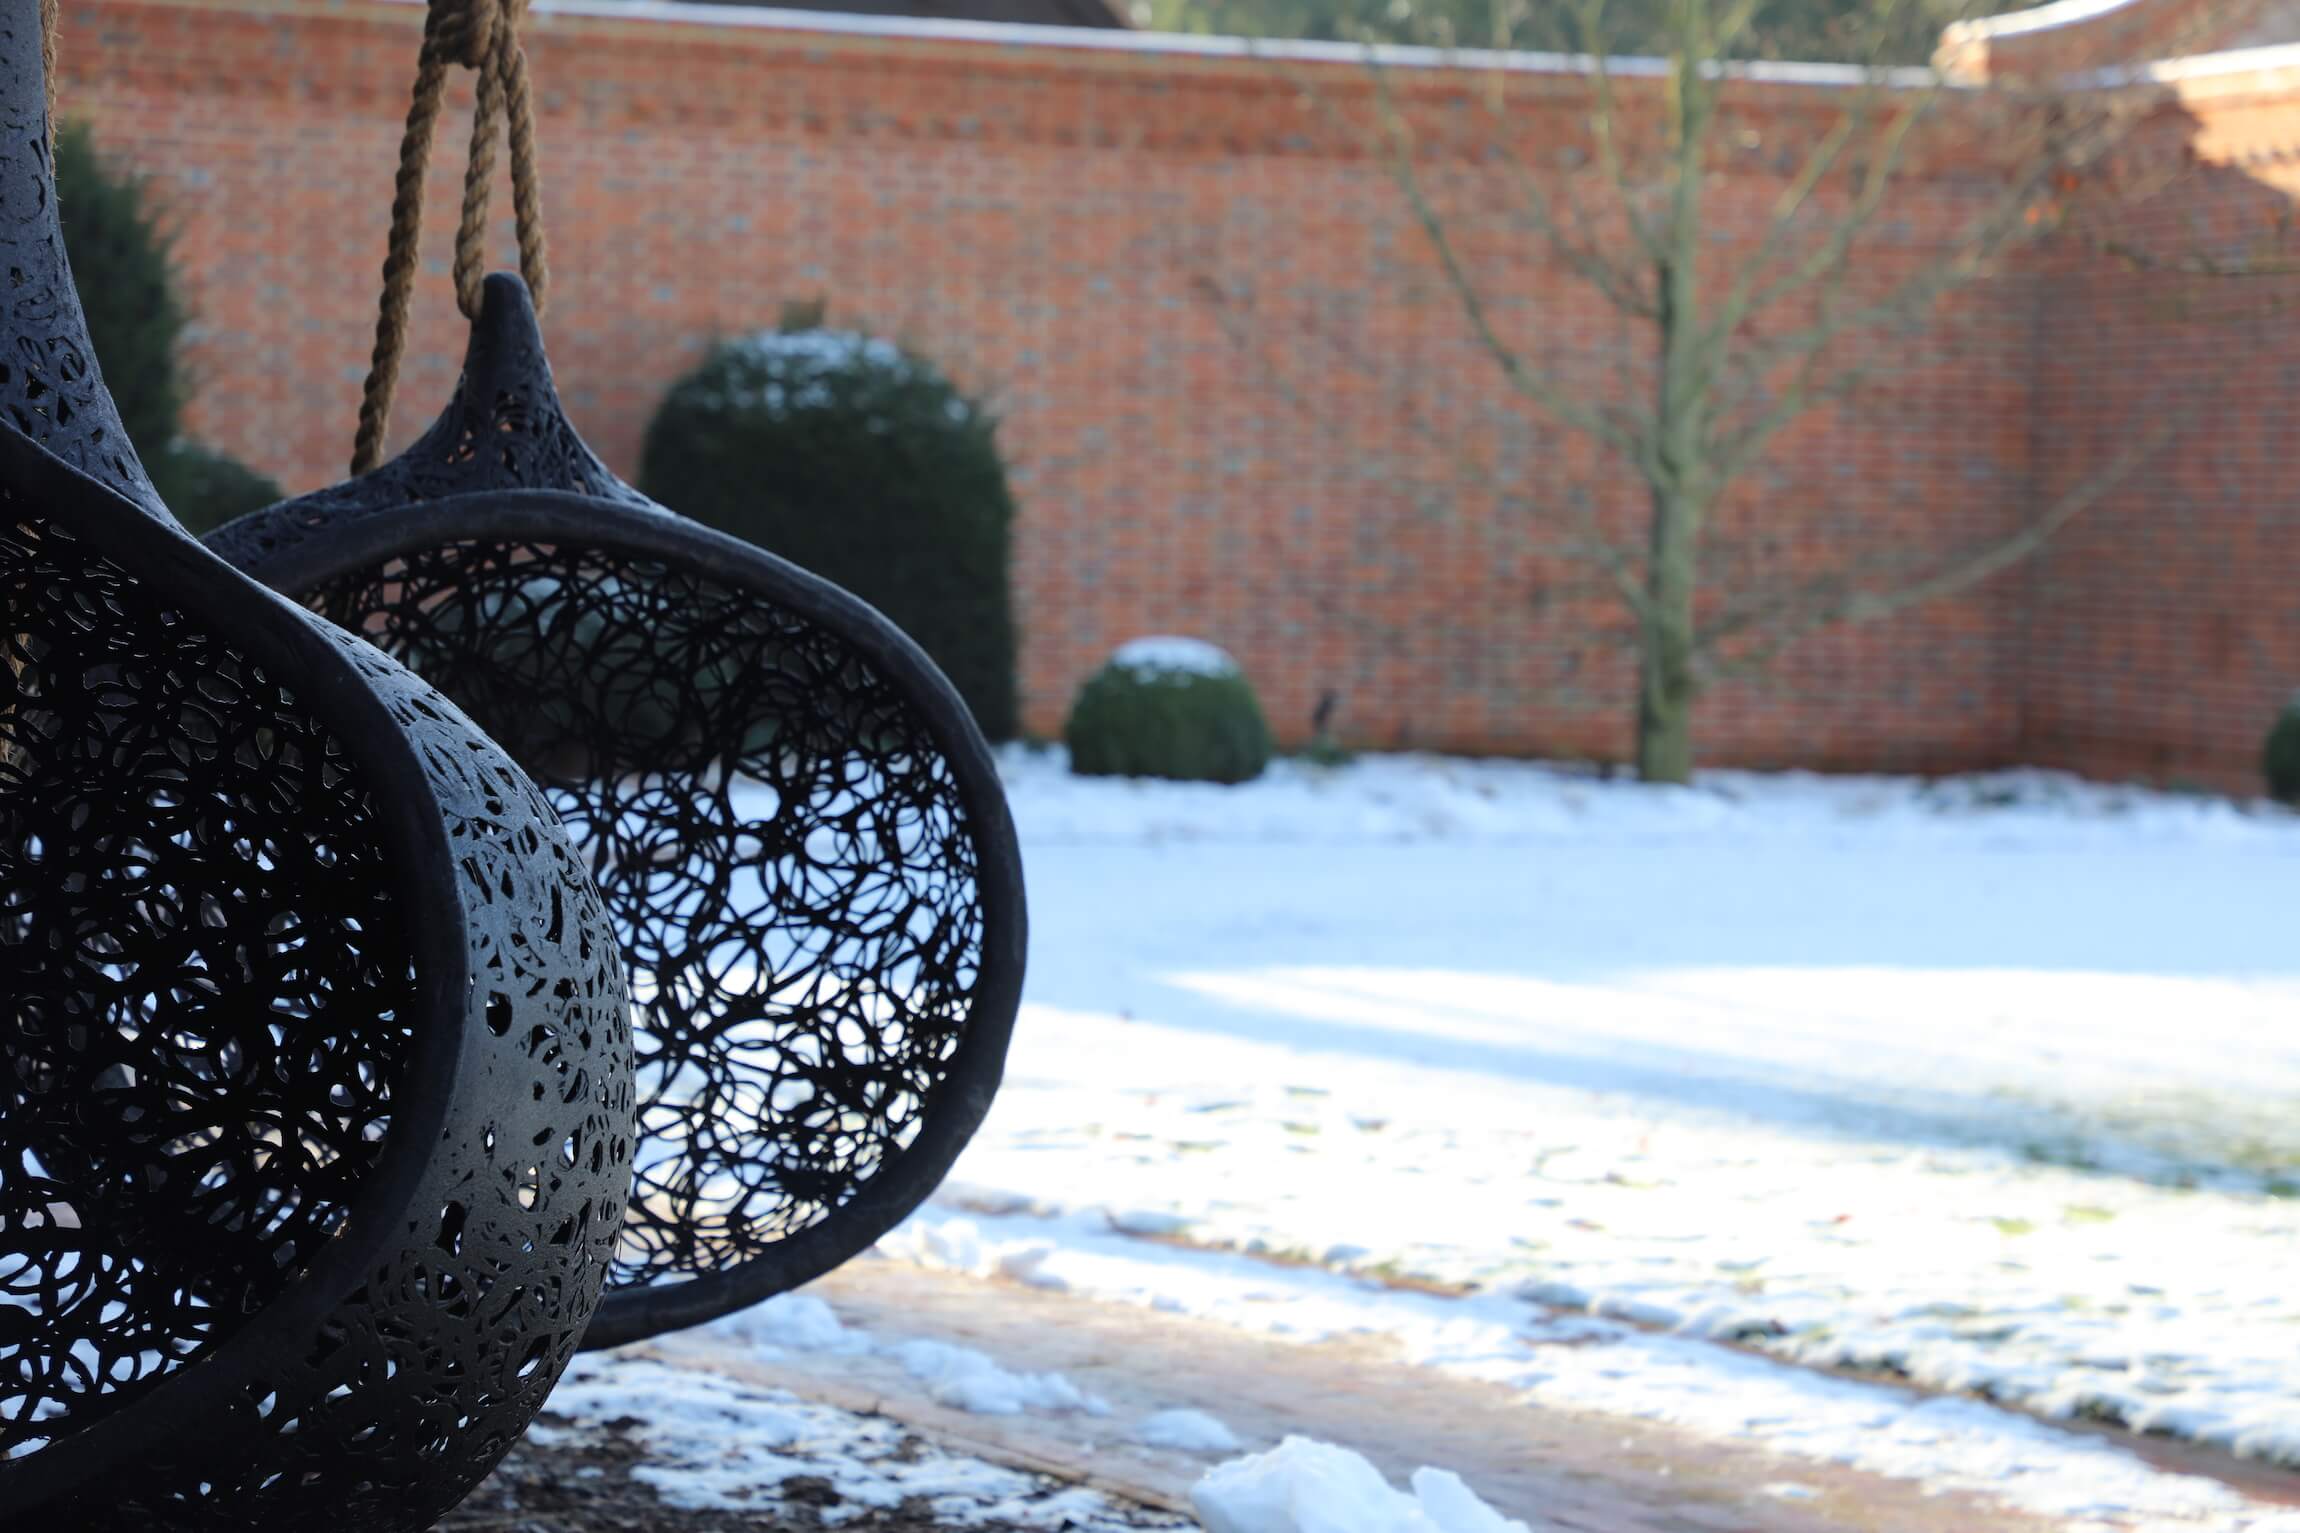 pod nest swings in a garden and melting snow